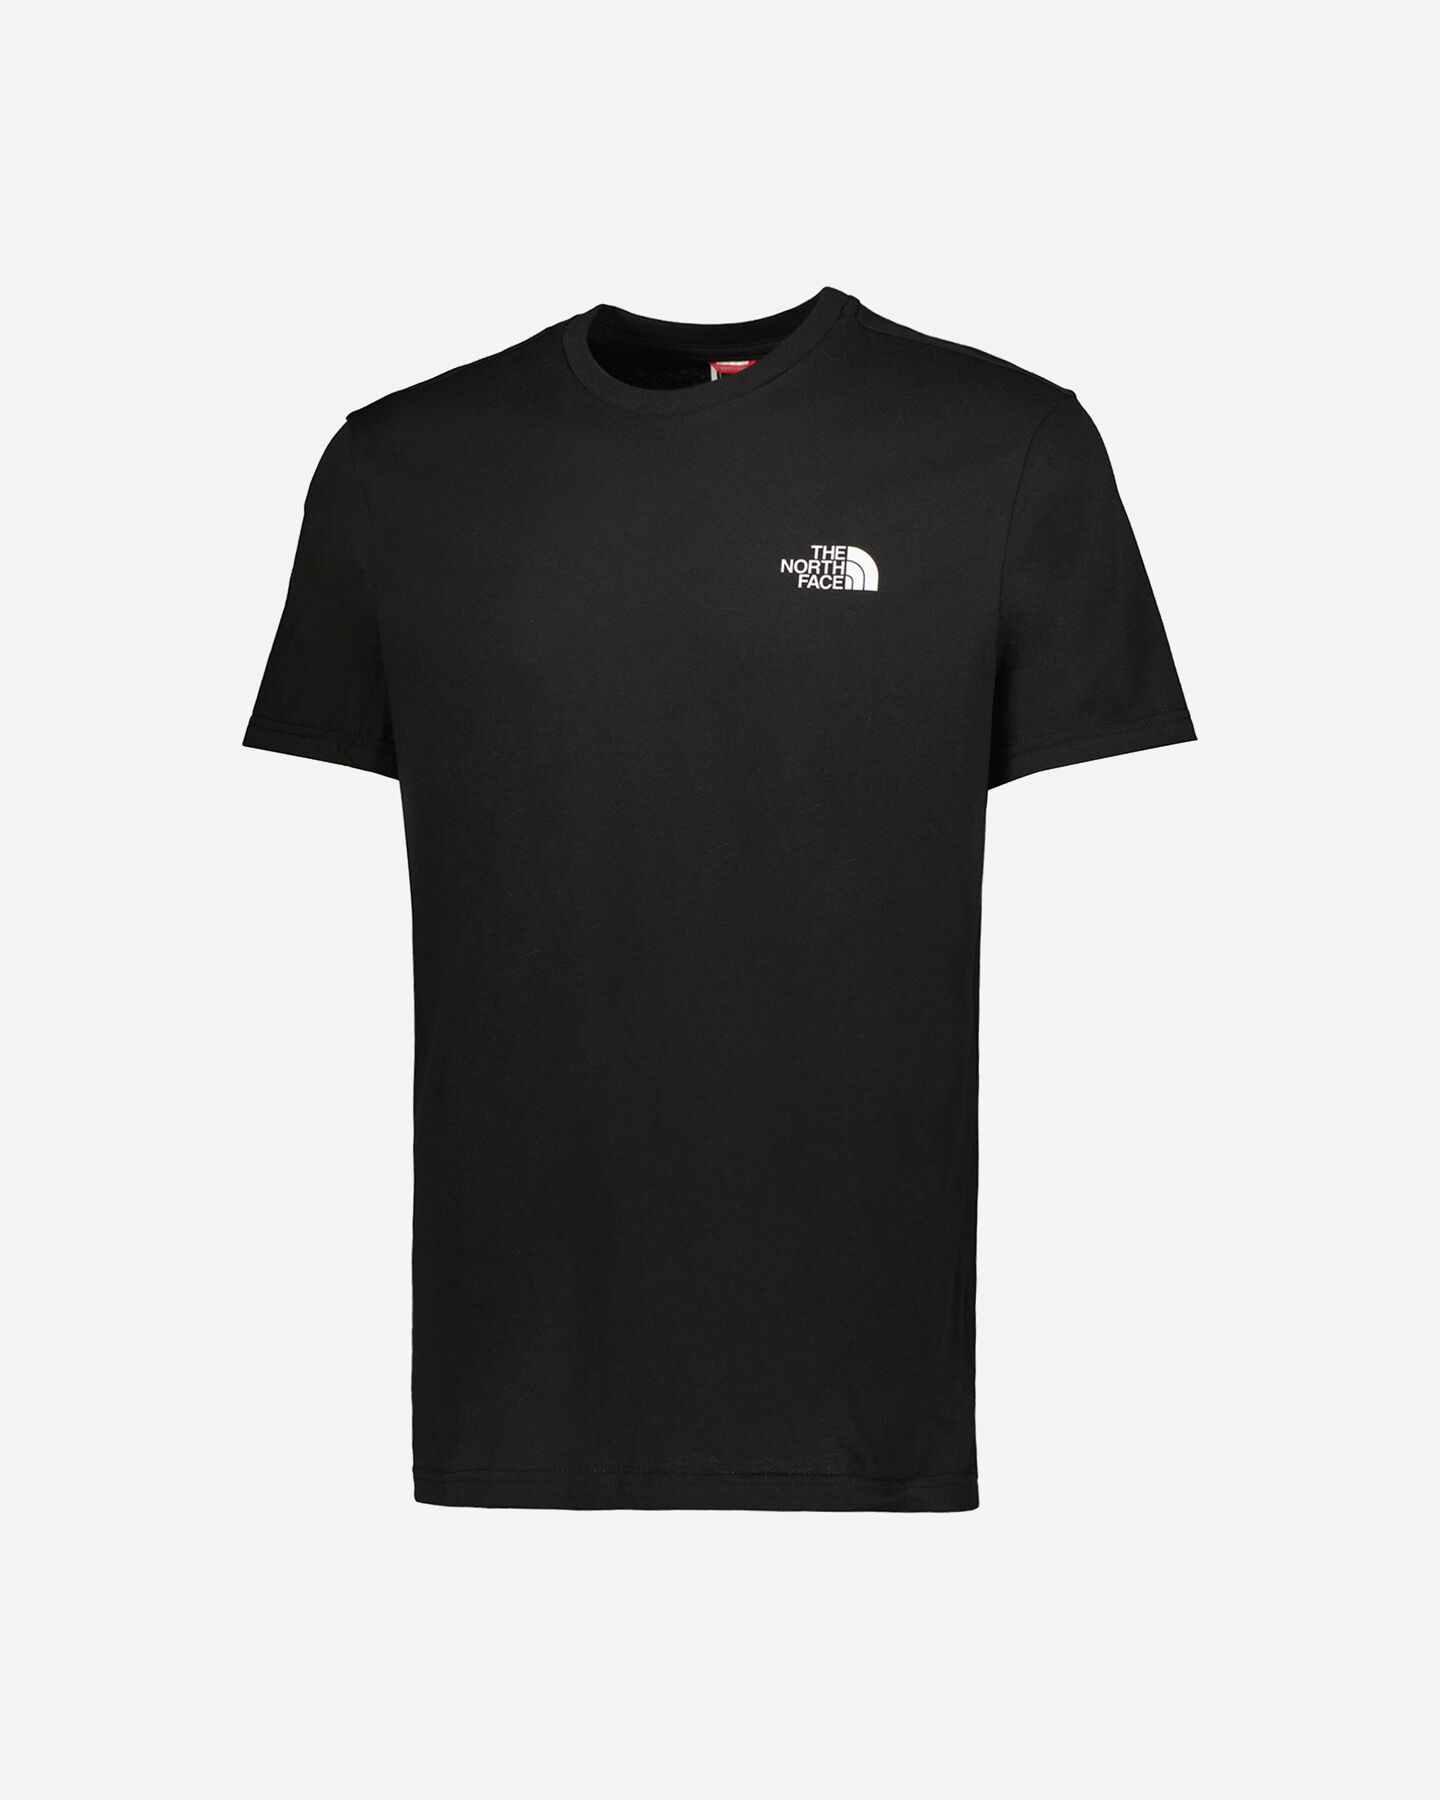  T-Shirt THE NORTH FACE SIMPLE DOME M S5015383|JK3|XXS scatto 0